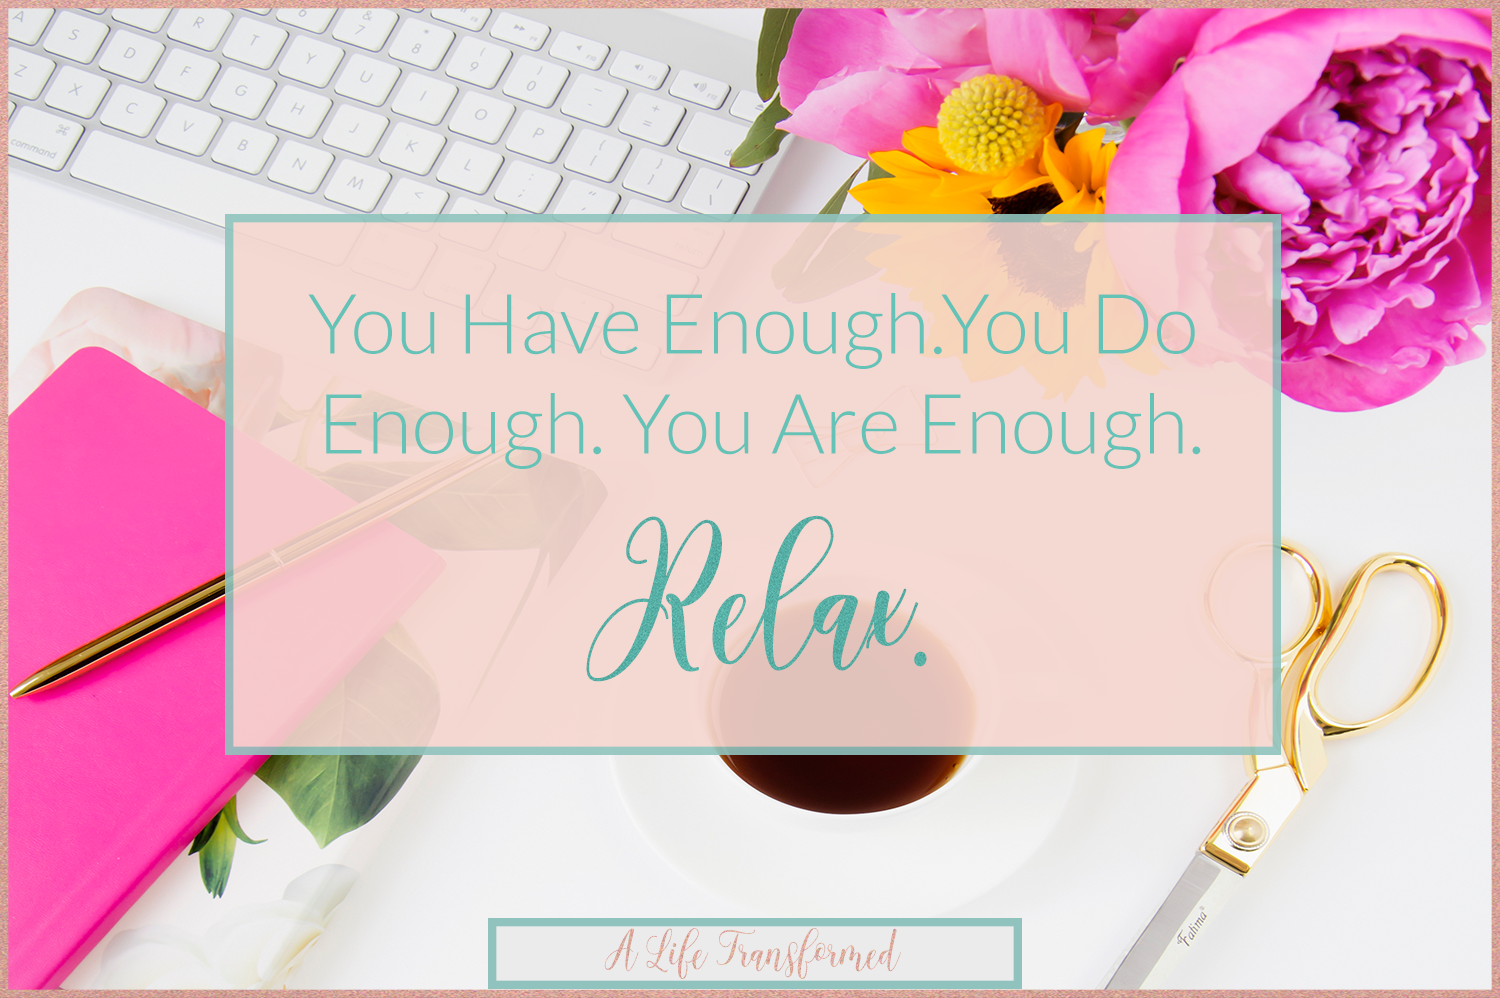 You-Are-Enough-Relax